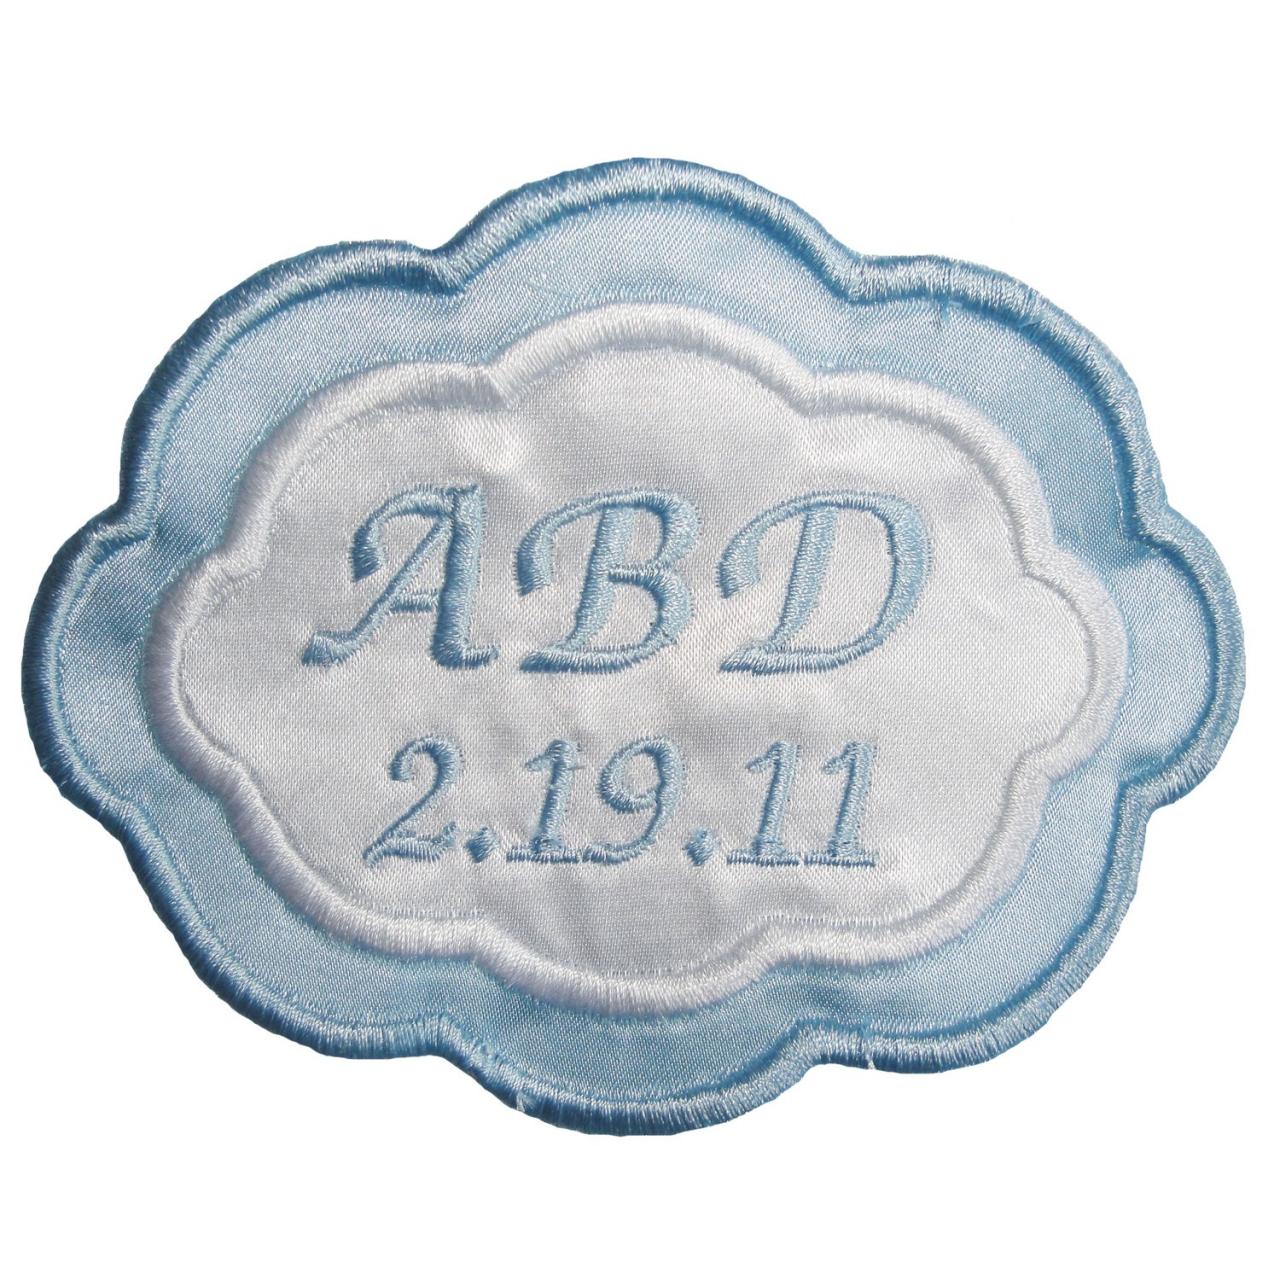 Arielle Embroidered Personalized Wedding Gown Label In Bridal Blue And White And Gift Box